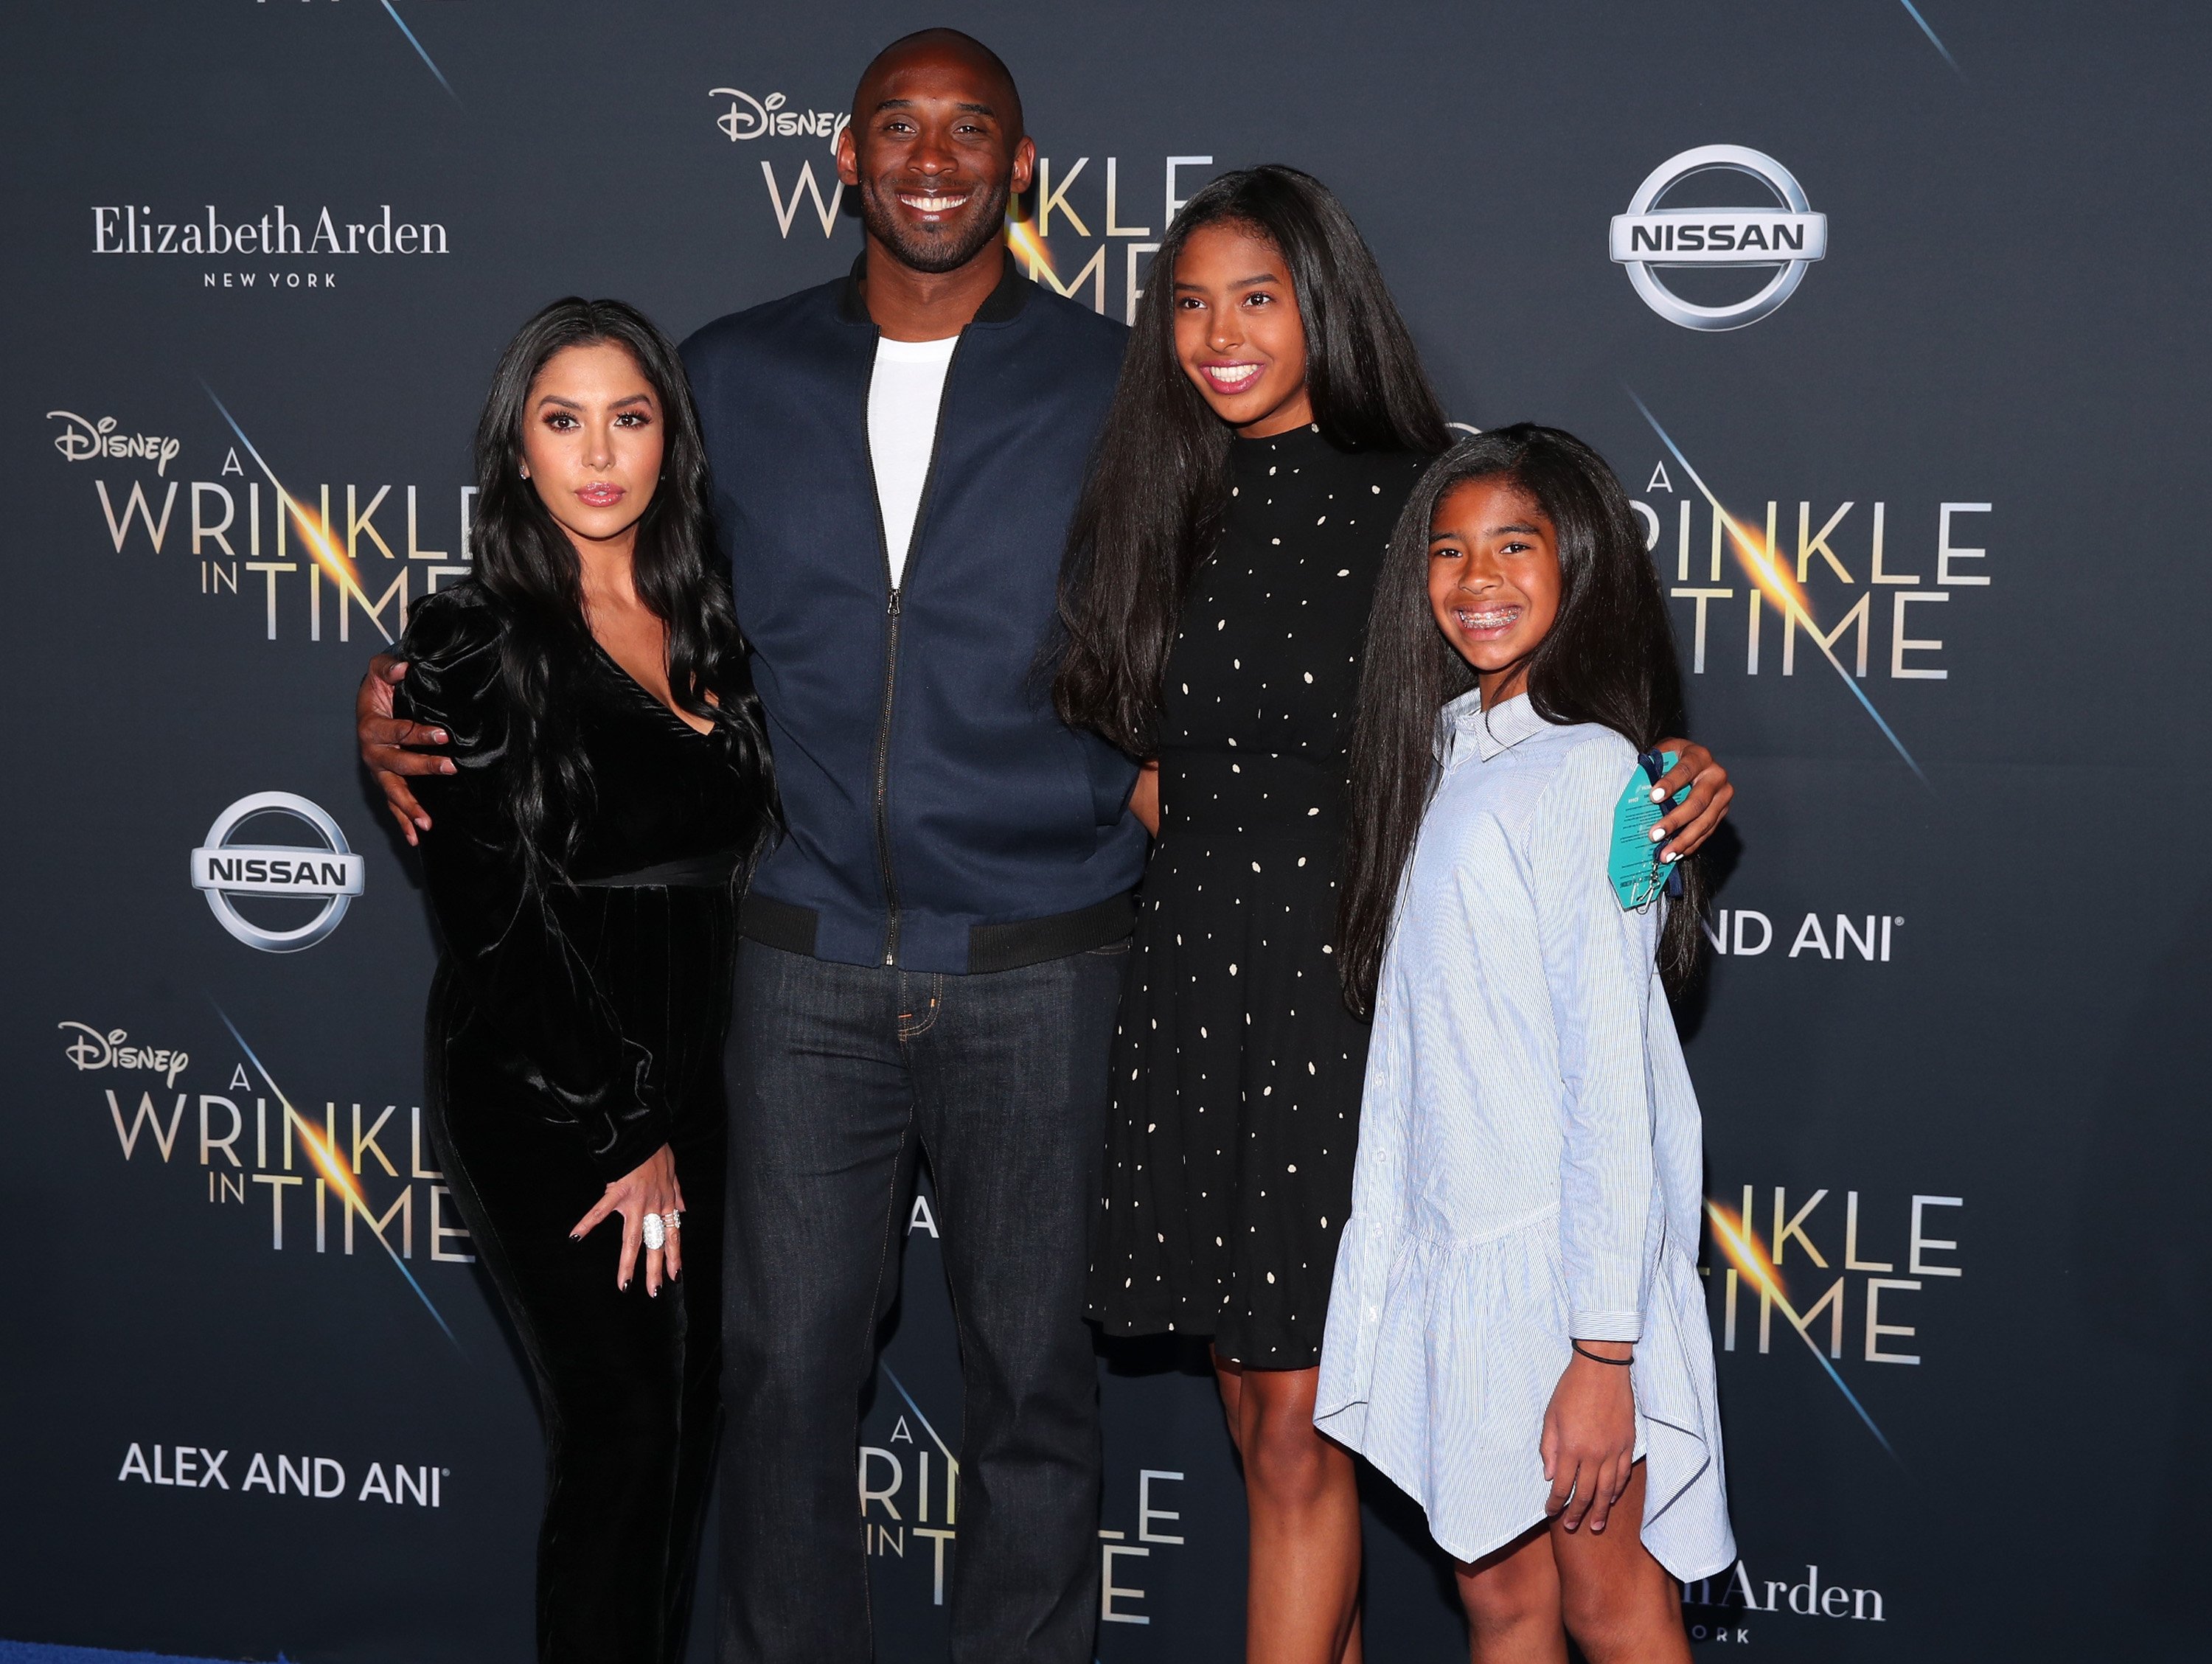 Kobe Bryant and his family at the premiere of Disney's "A Wrinkle In Time" at the El Capitan Theatre on February 26, 2018 in Los Angeles, California.| Source: Getty Images